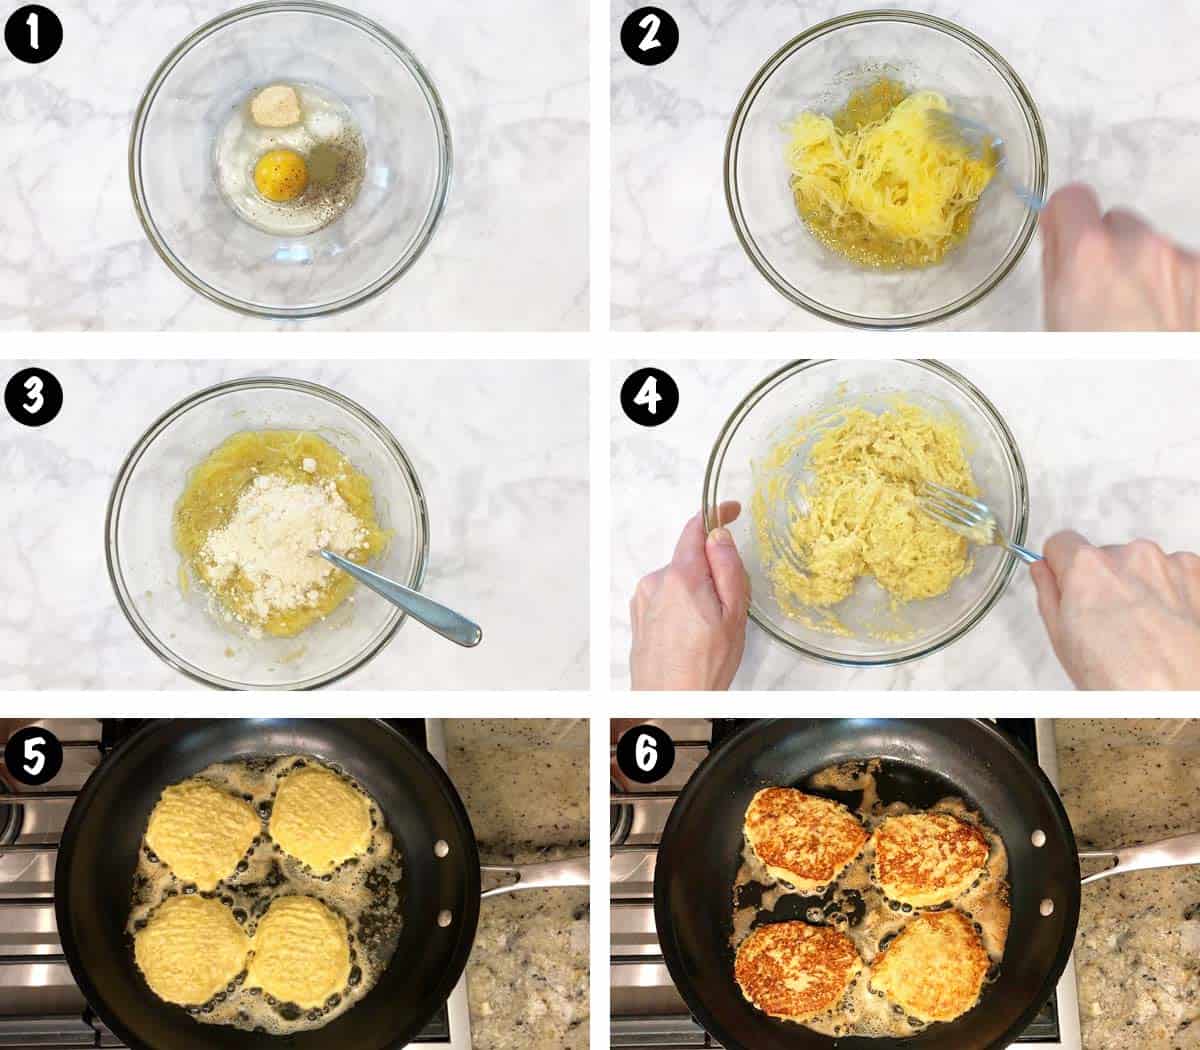 A six-photo collage showing the steps for making spaghetti squash fritters.